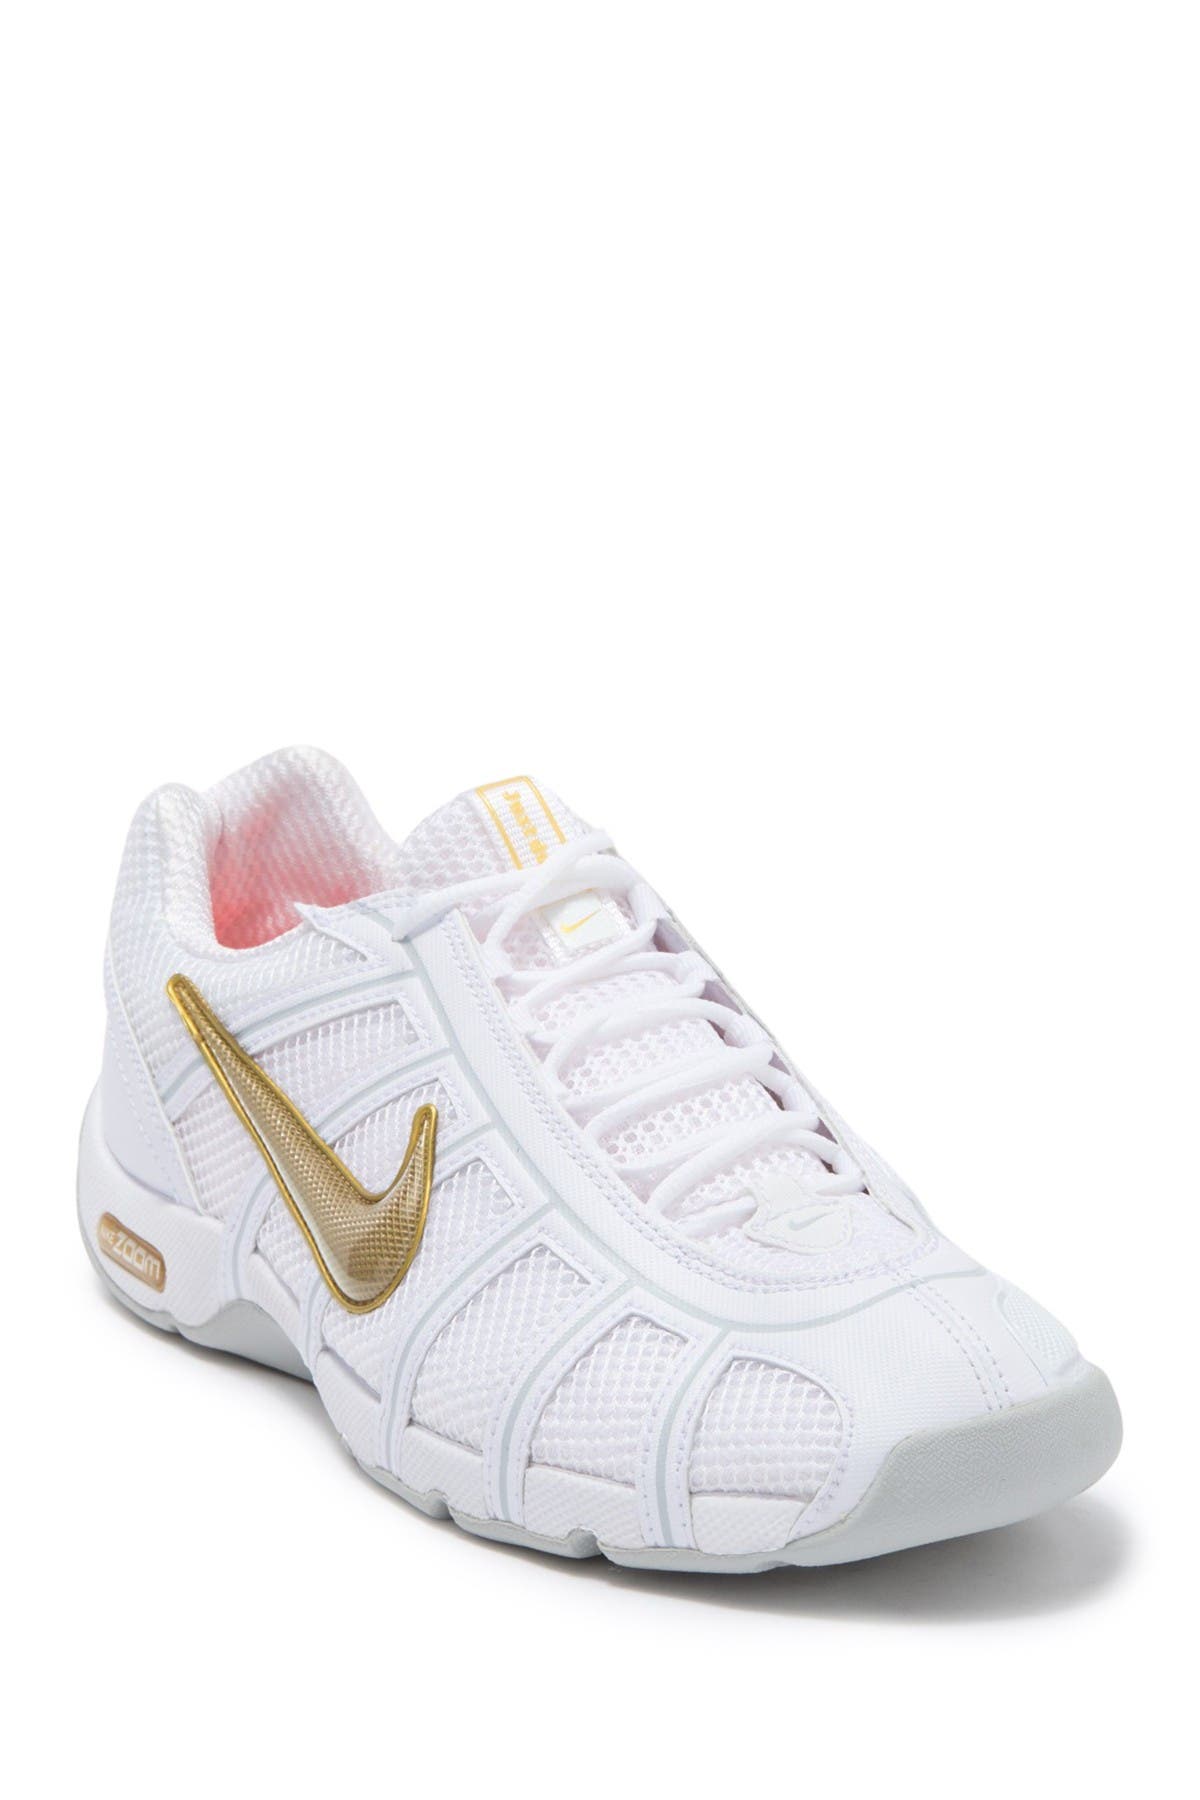 nike air zoom fencer gold